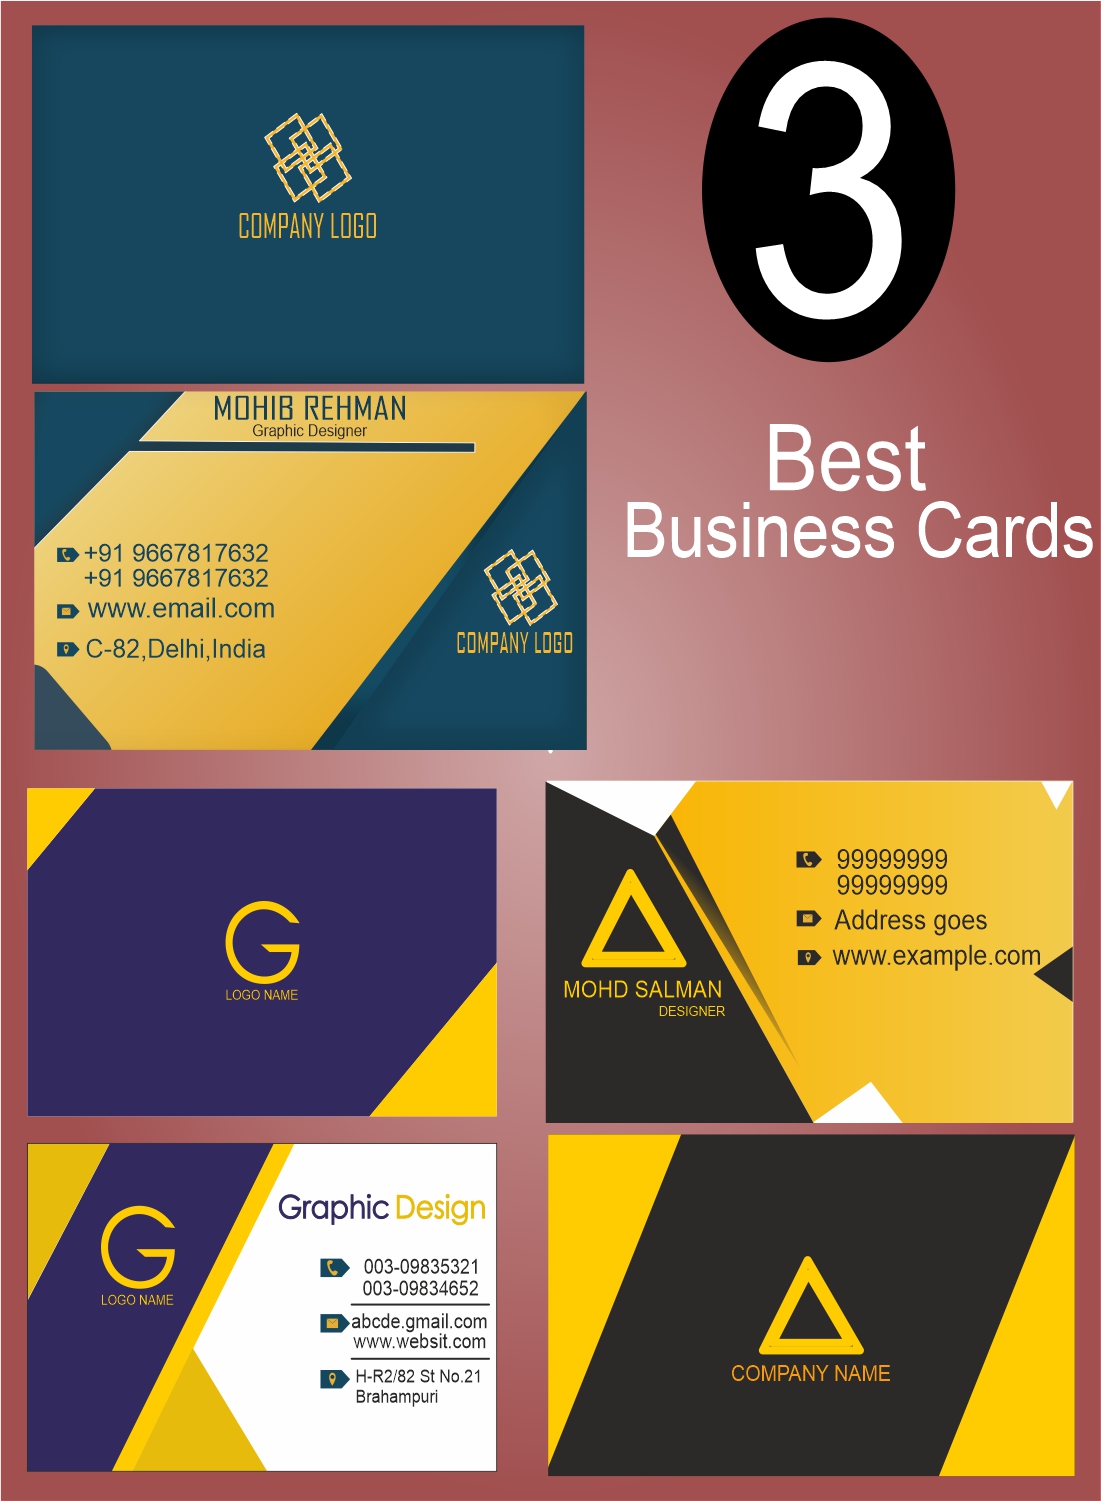 3 Best Business Cards Designs with High-Resolution pinterest preview image.